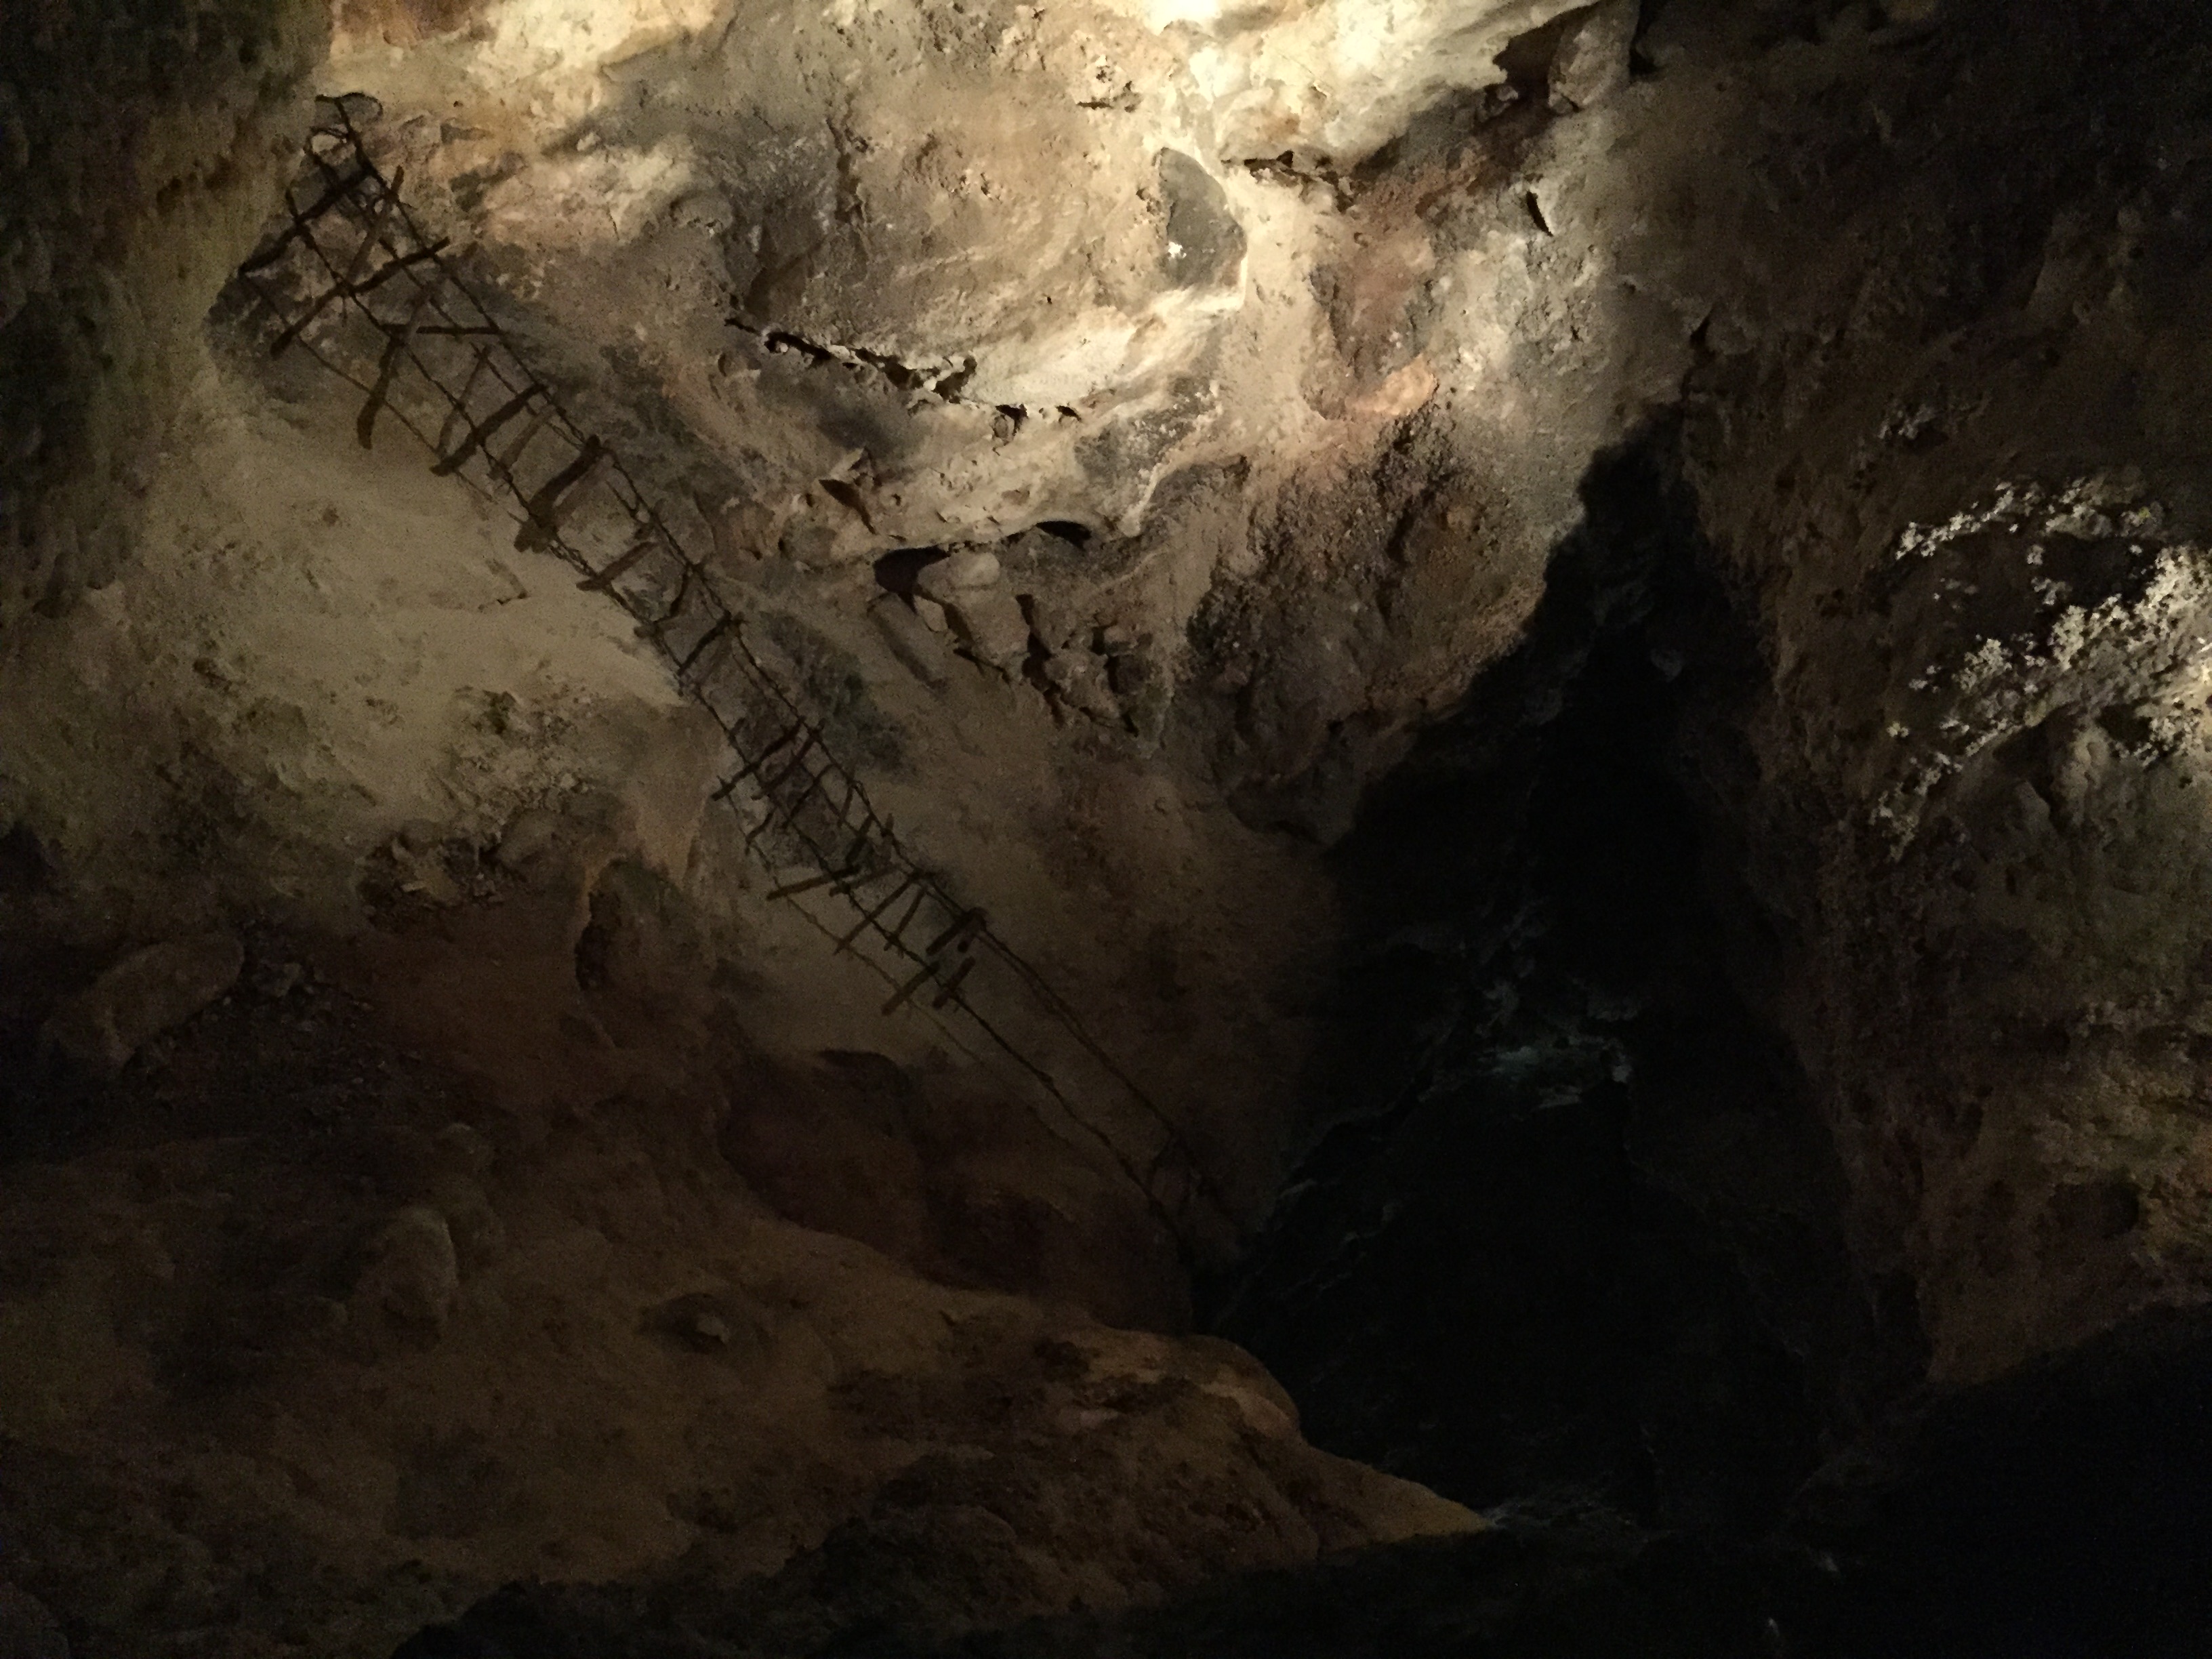 Some of the old cave exploration ladders are still visible but thankfully not used.